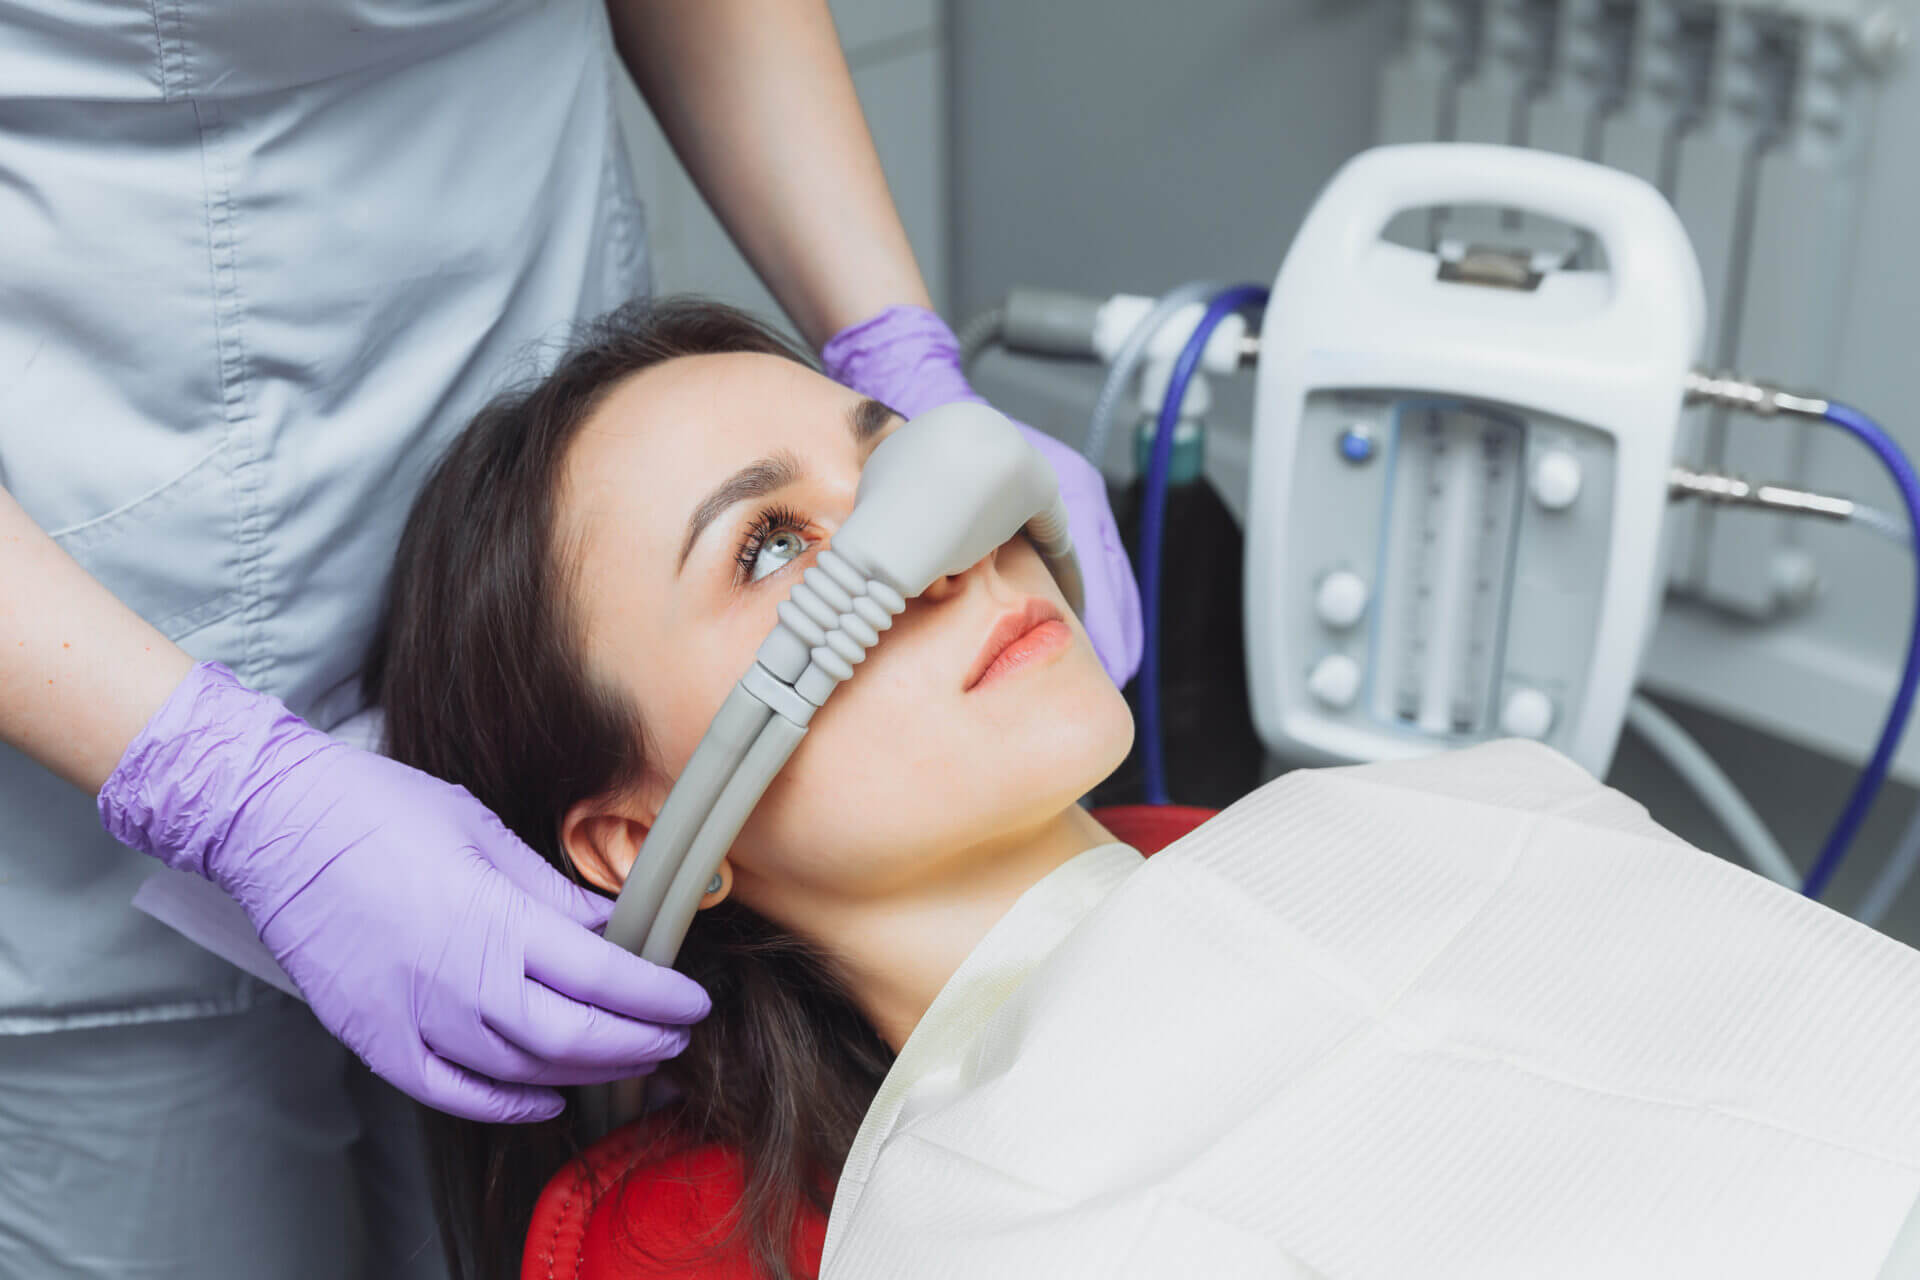 6 Questions to Ask When Choosing the Right Sedation Dentist for You